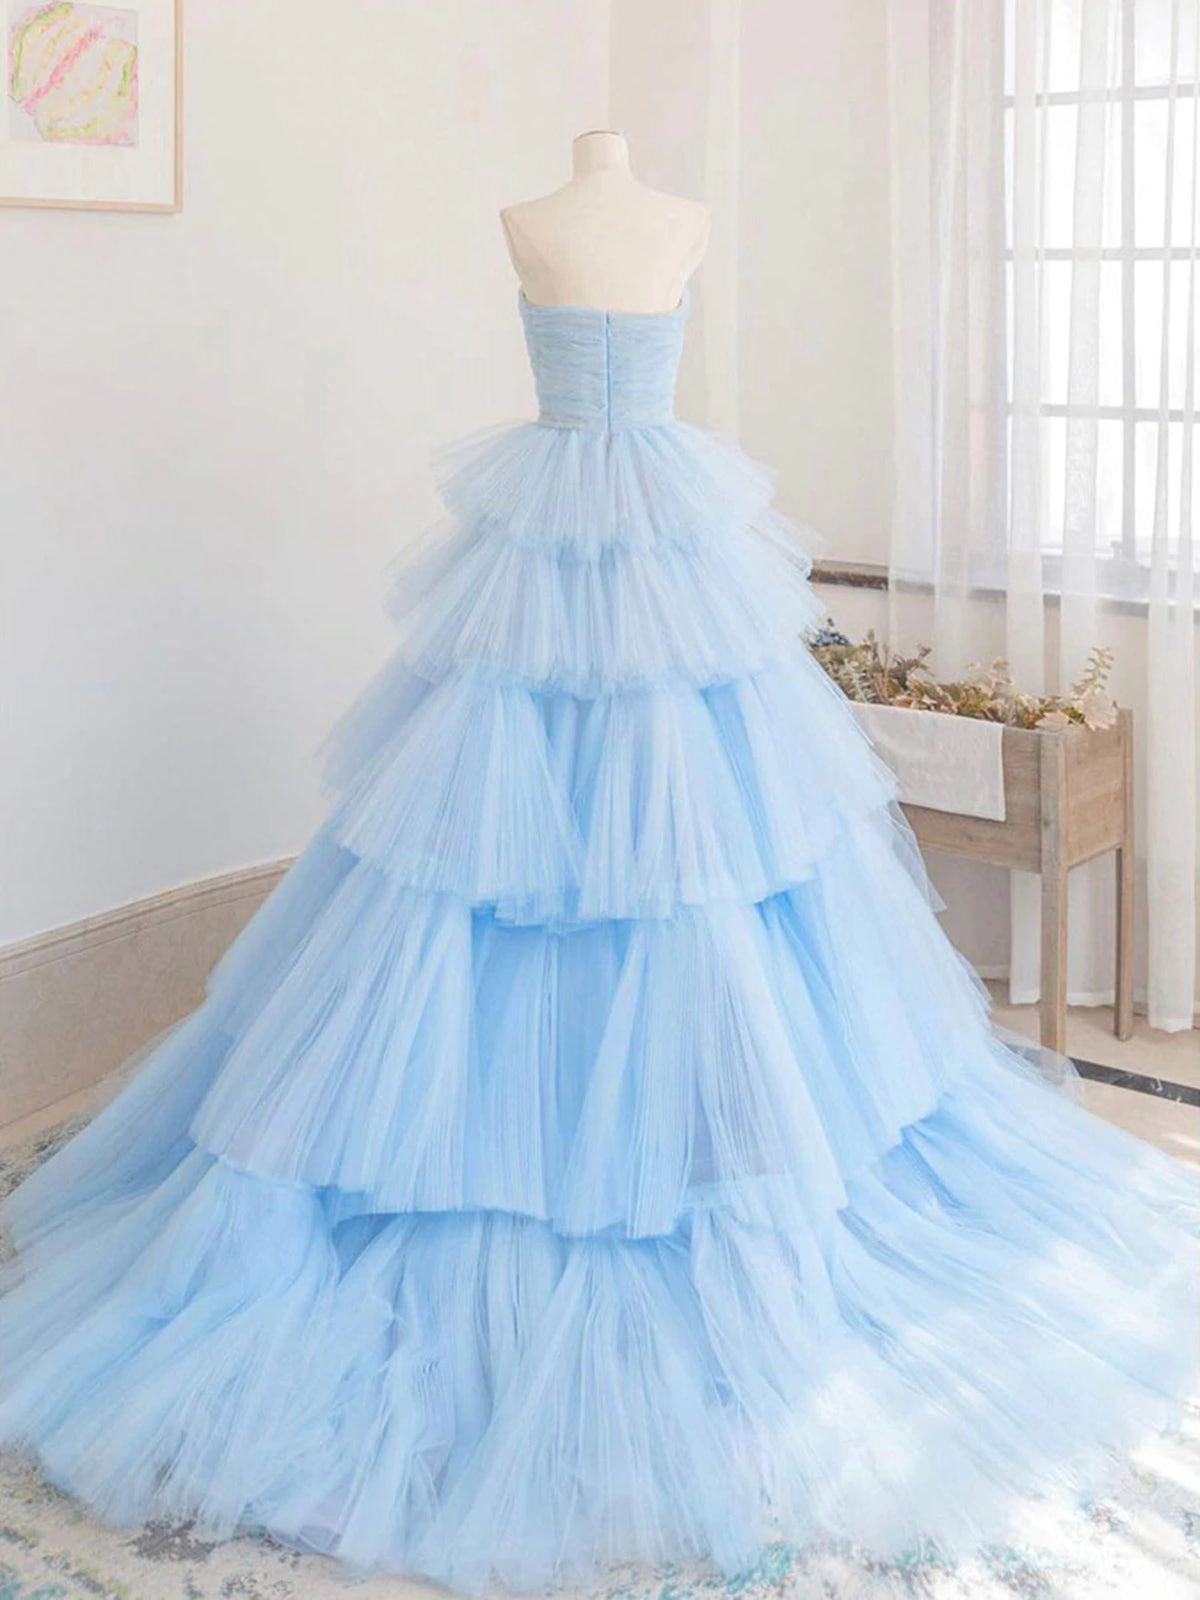 Homecoming Dress With Tulle, Blue High Low Tulle Prom Dresses, Blue Tulle High Low Formal Graduation Dresses